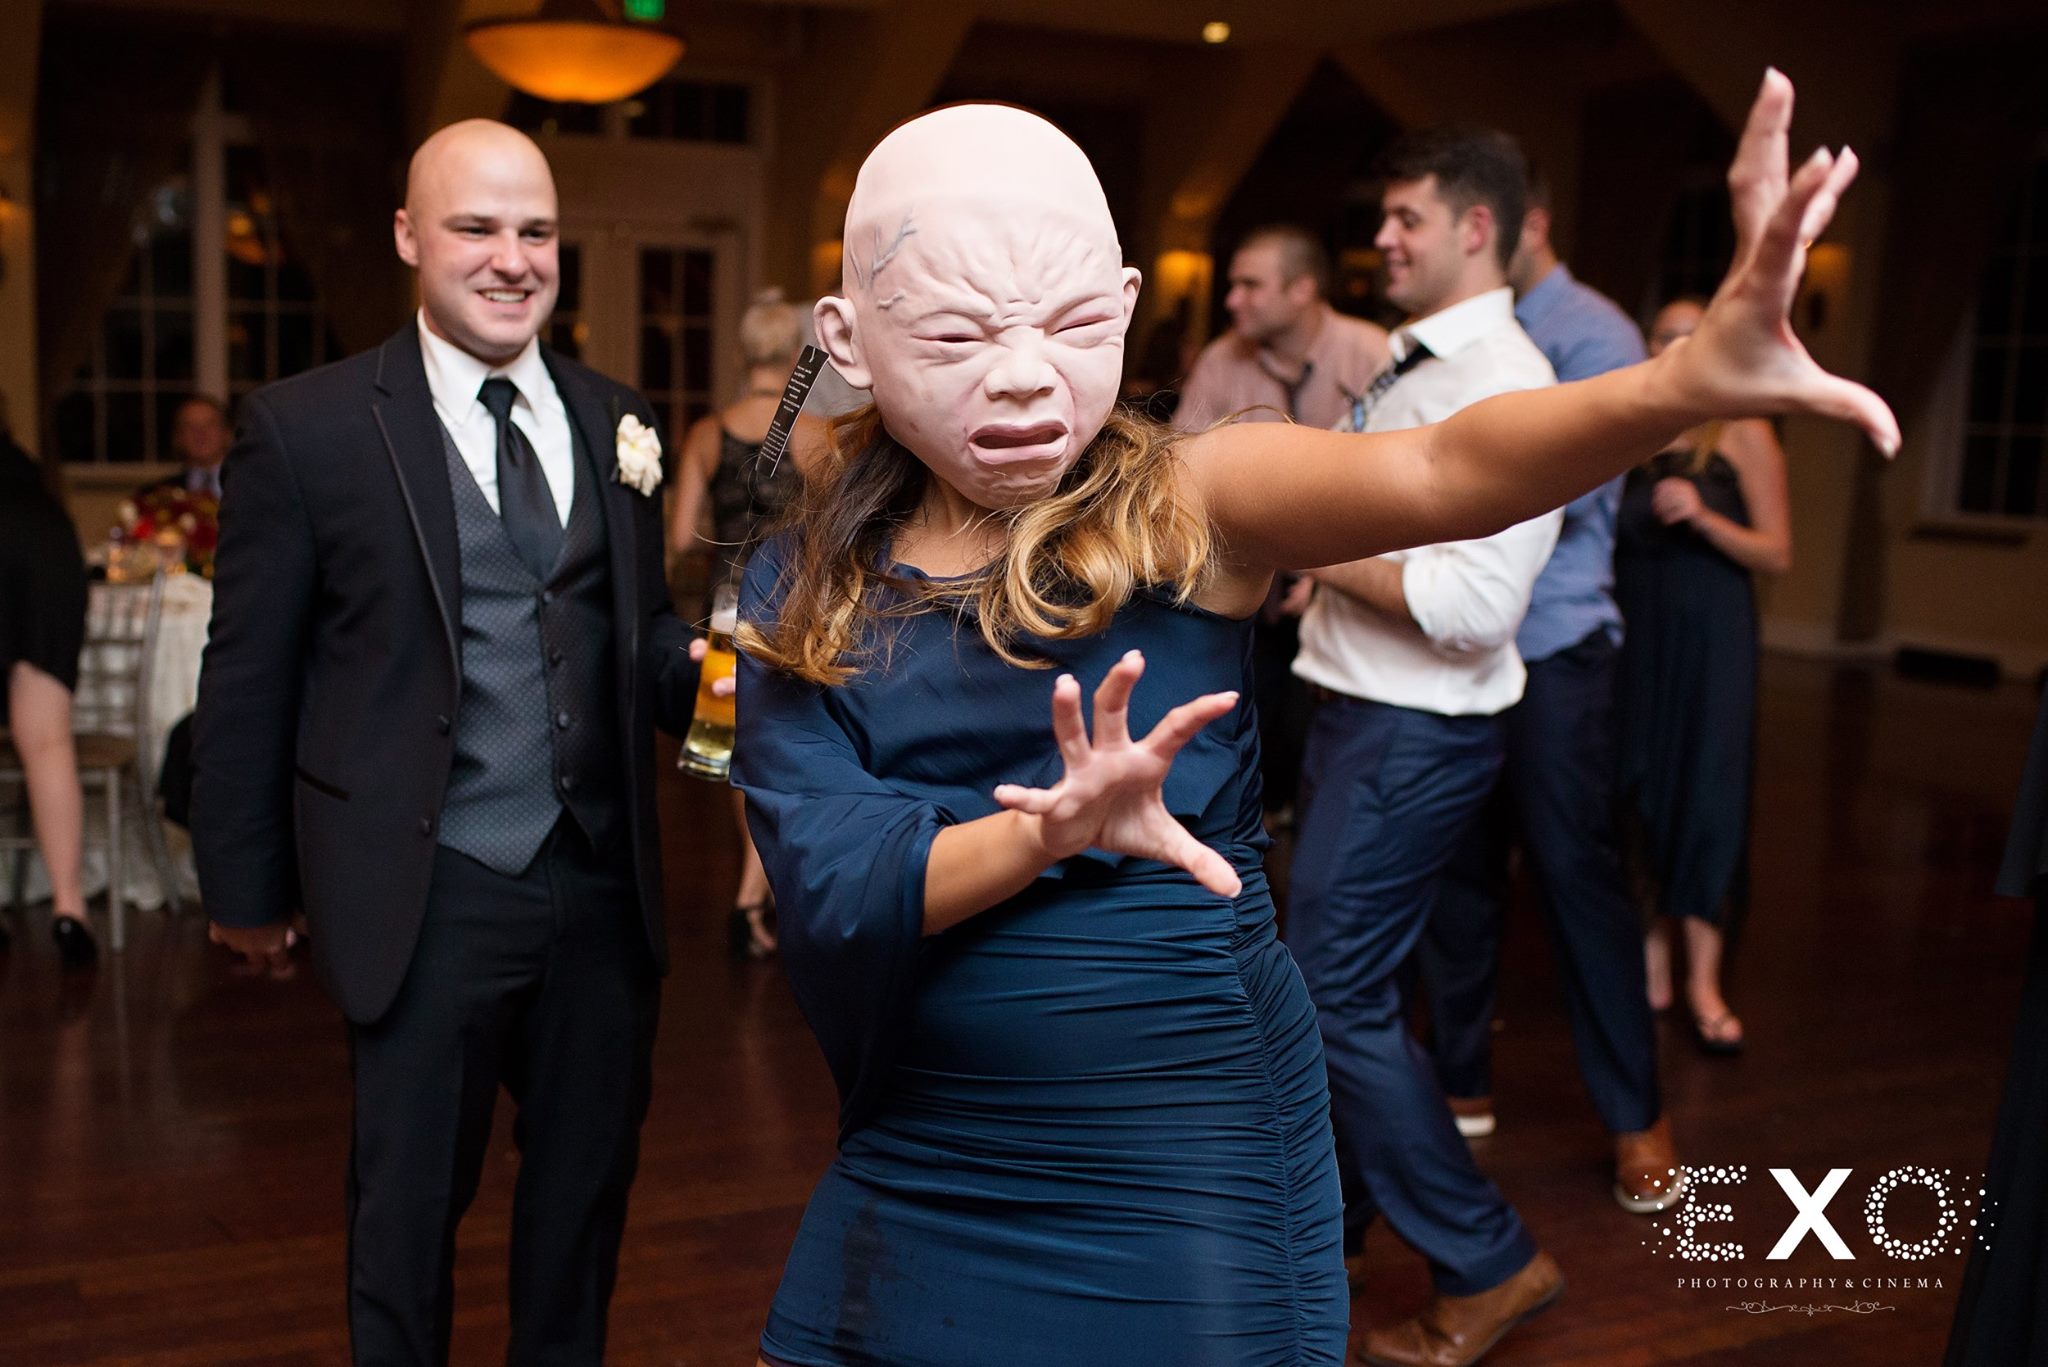 wedding guests wearing masks dancing to music by dj entertainment